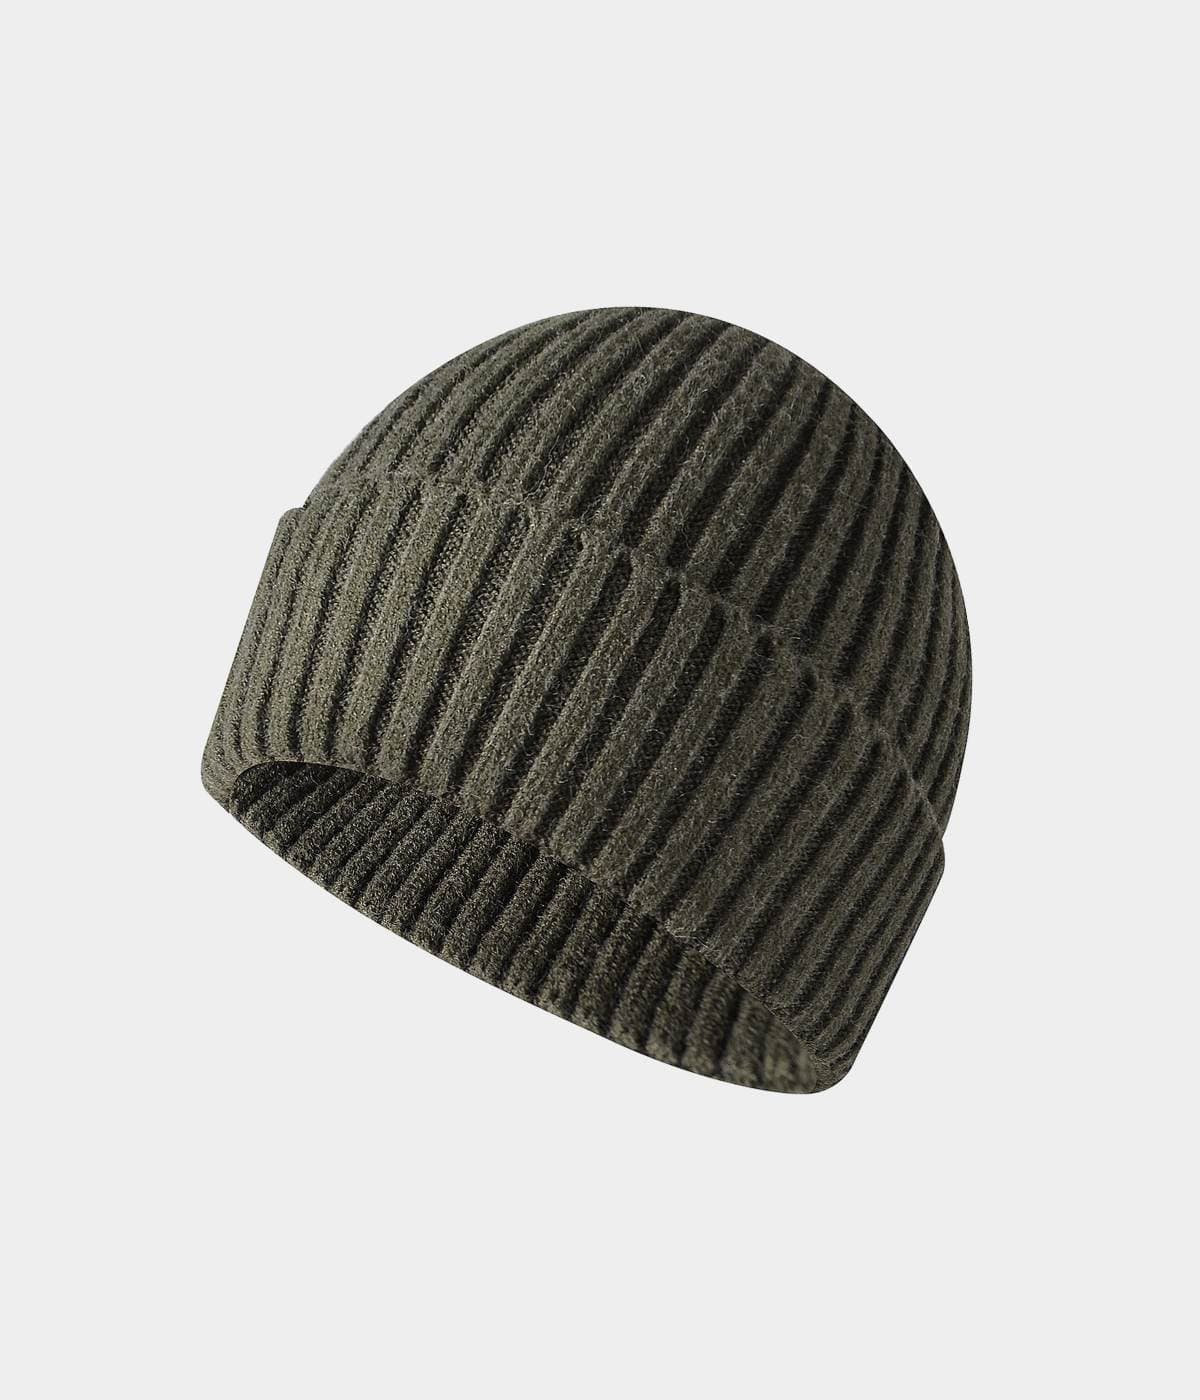 CABLE BEANIE.